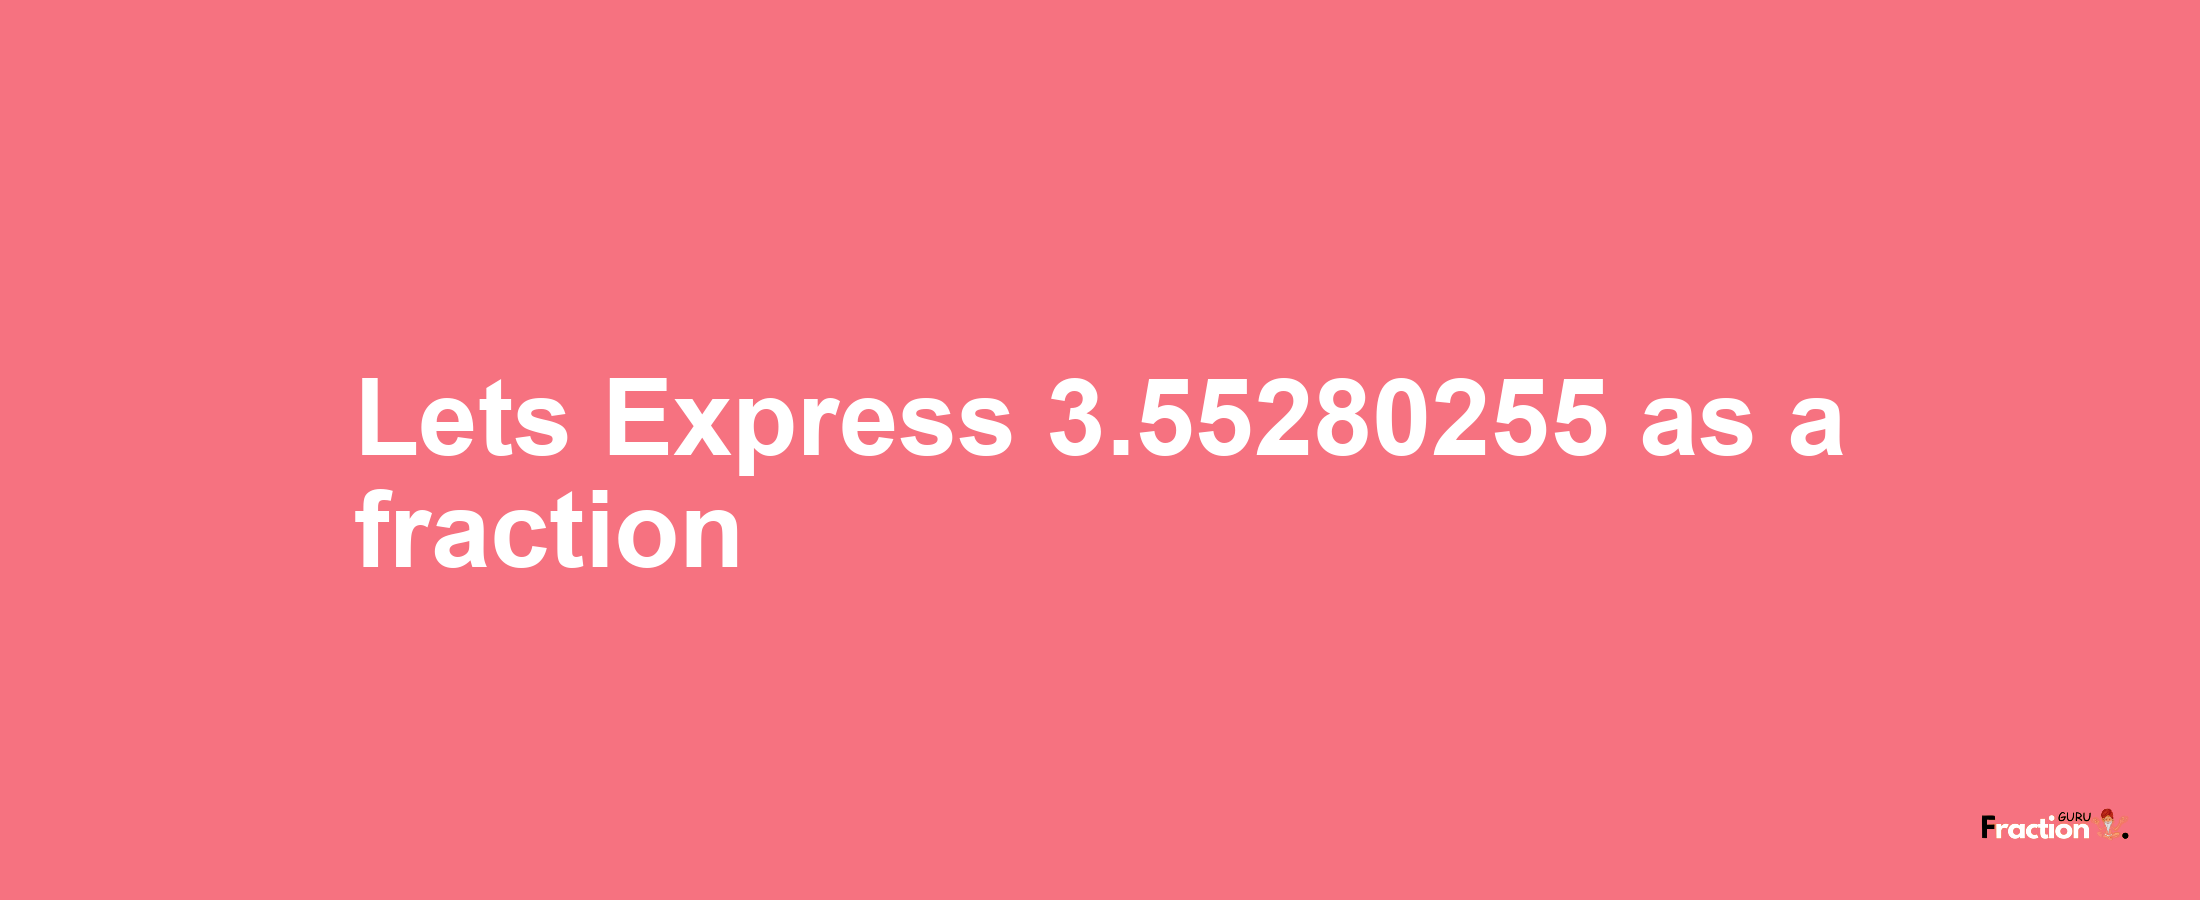 Lets Express 3.55280255 as afraction